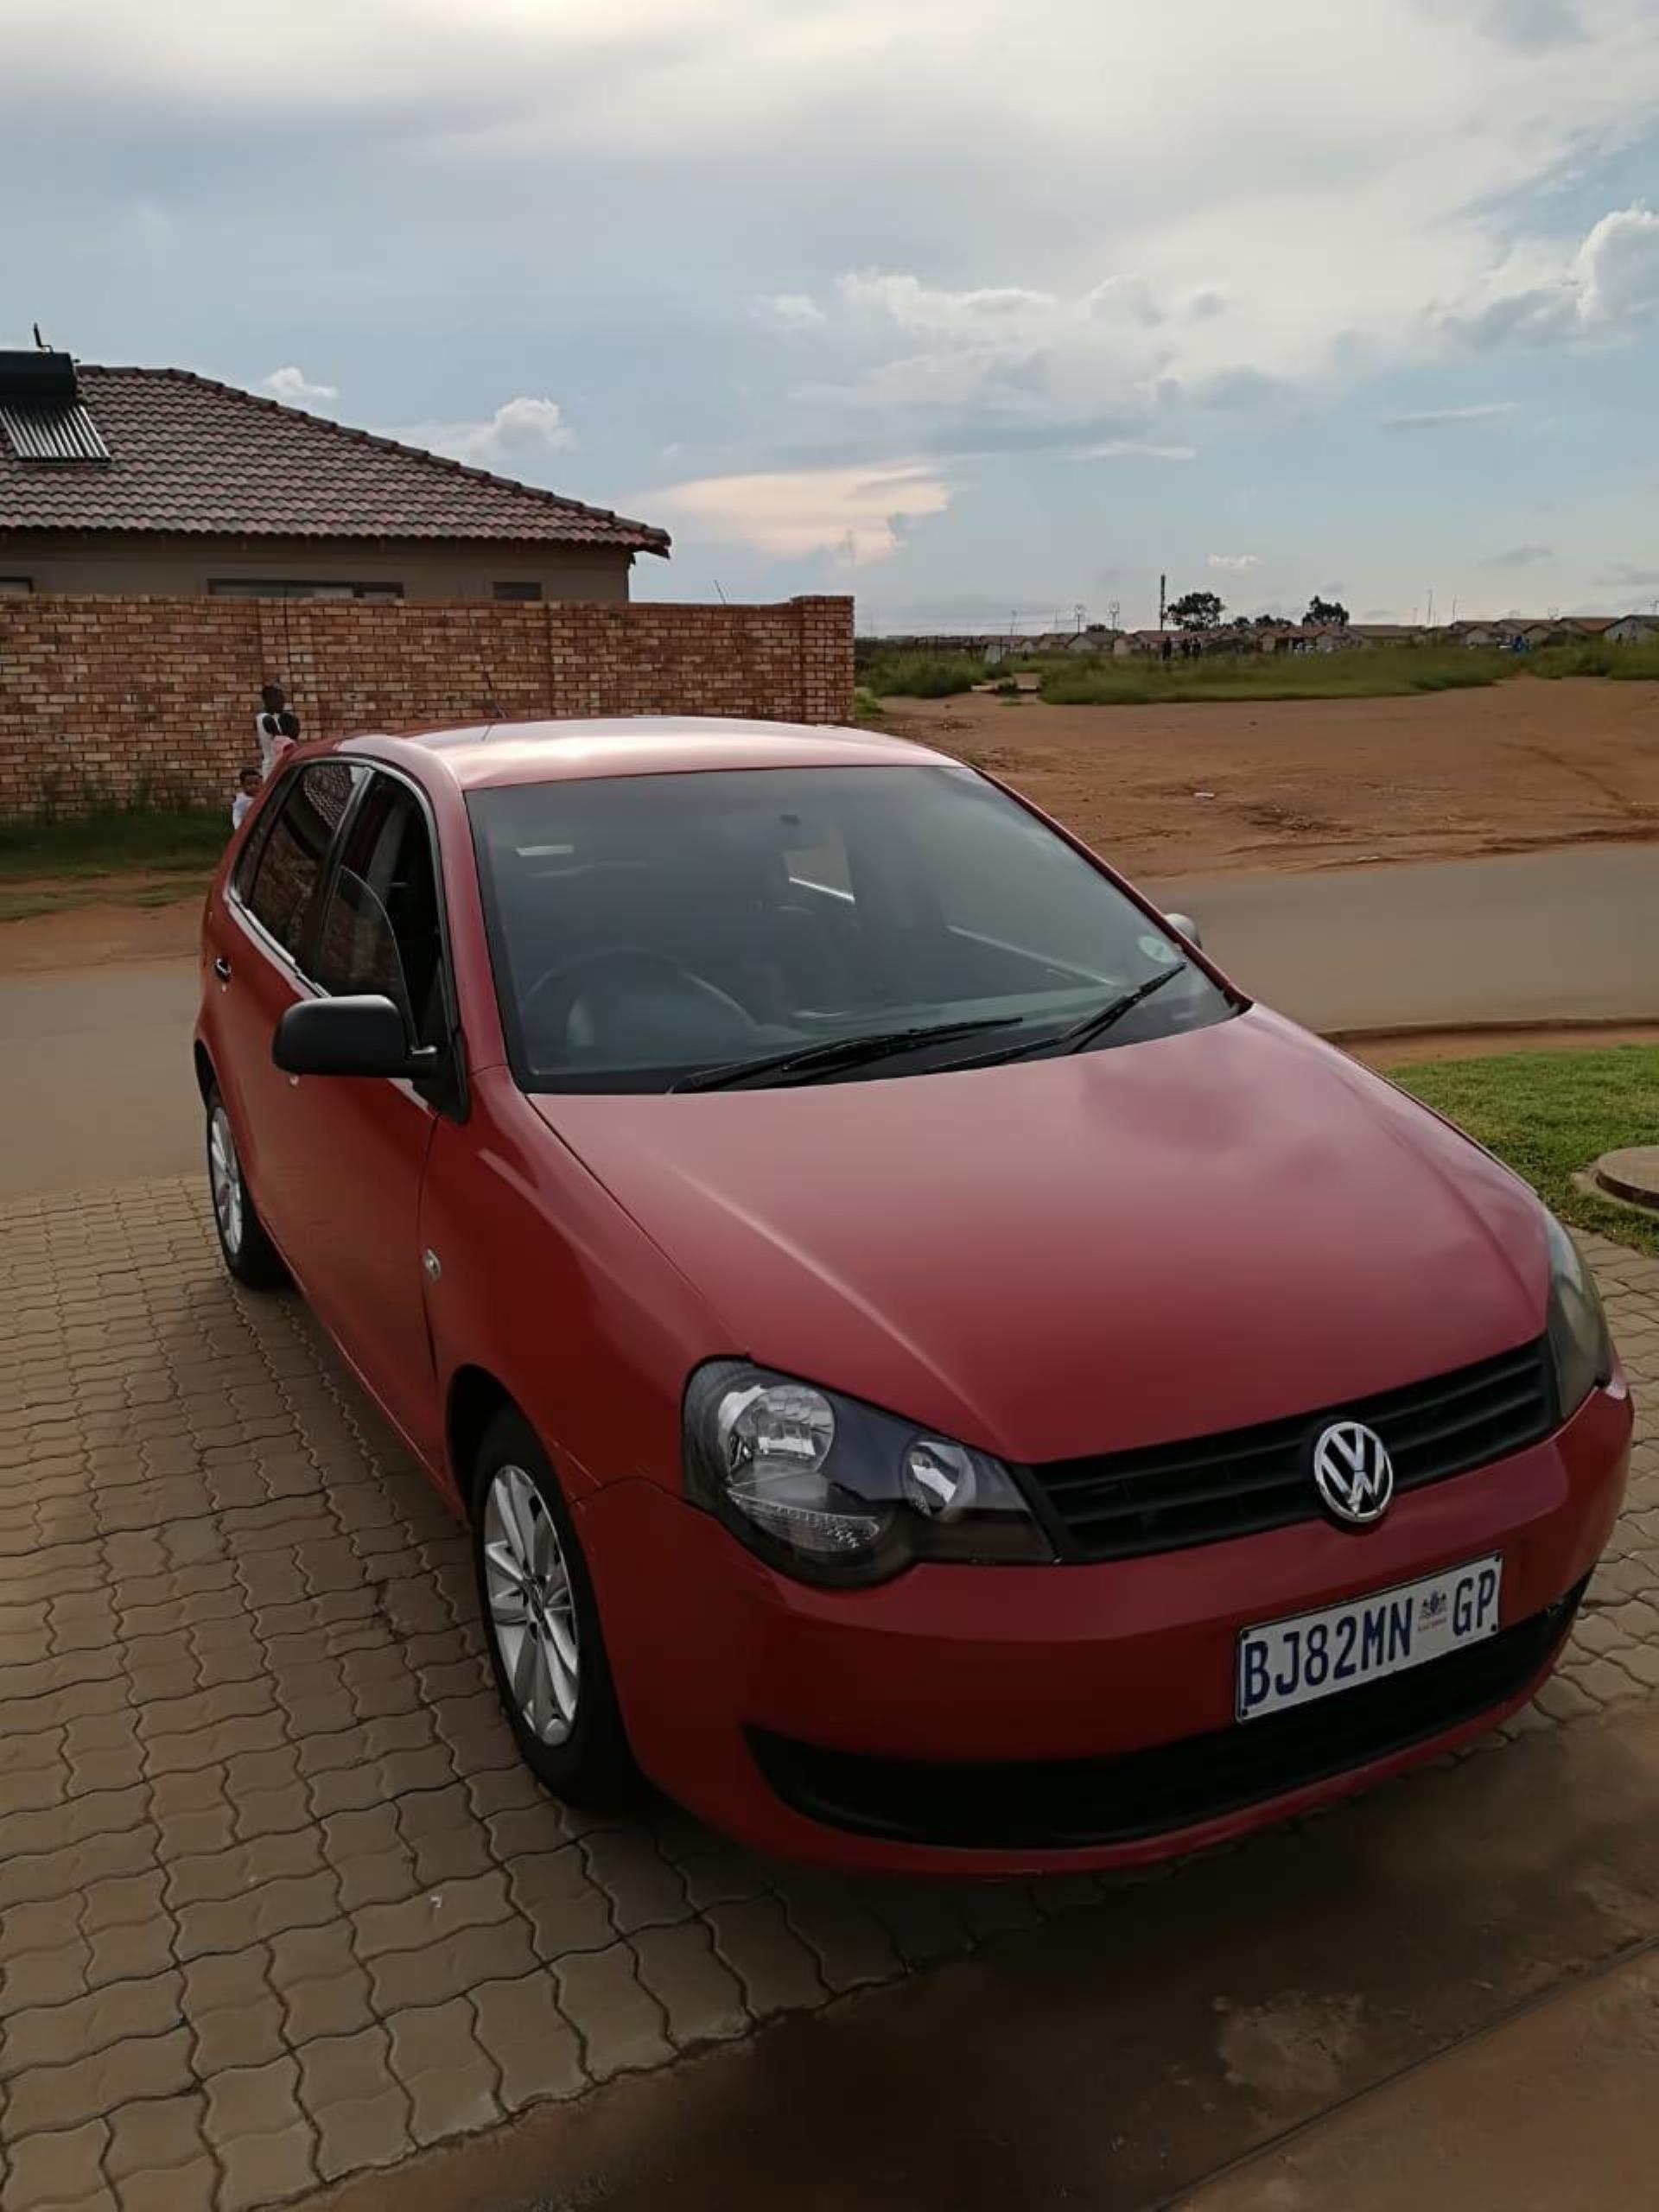 Used Volkswagen Polo Vivo 1.4 Hatchback 2011 on auction